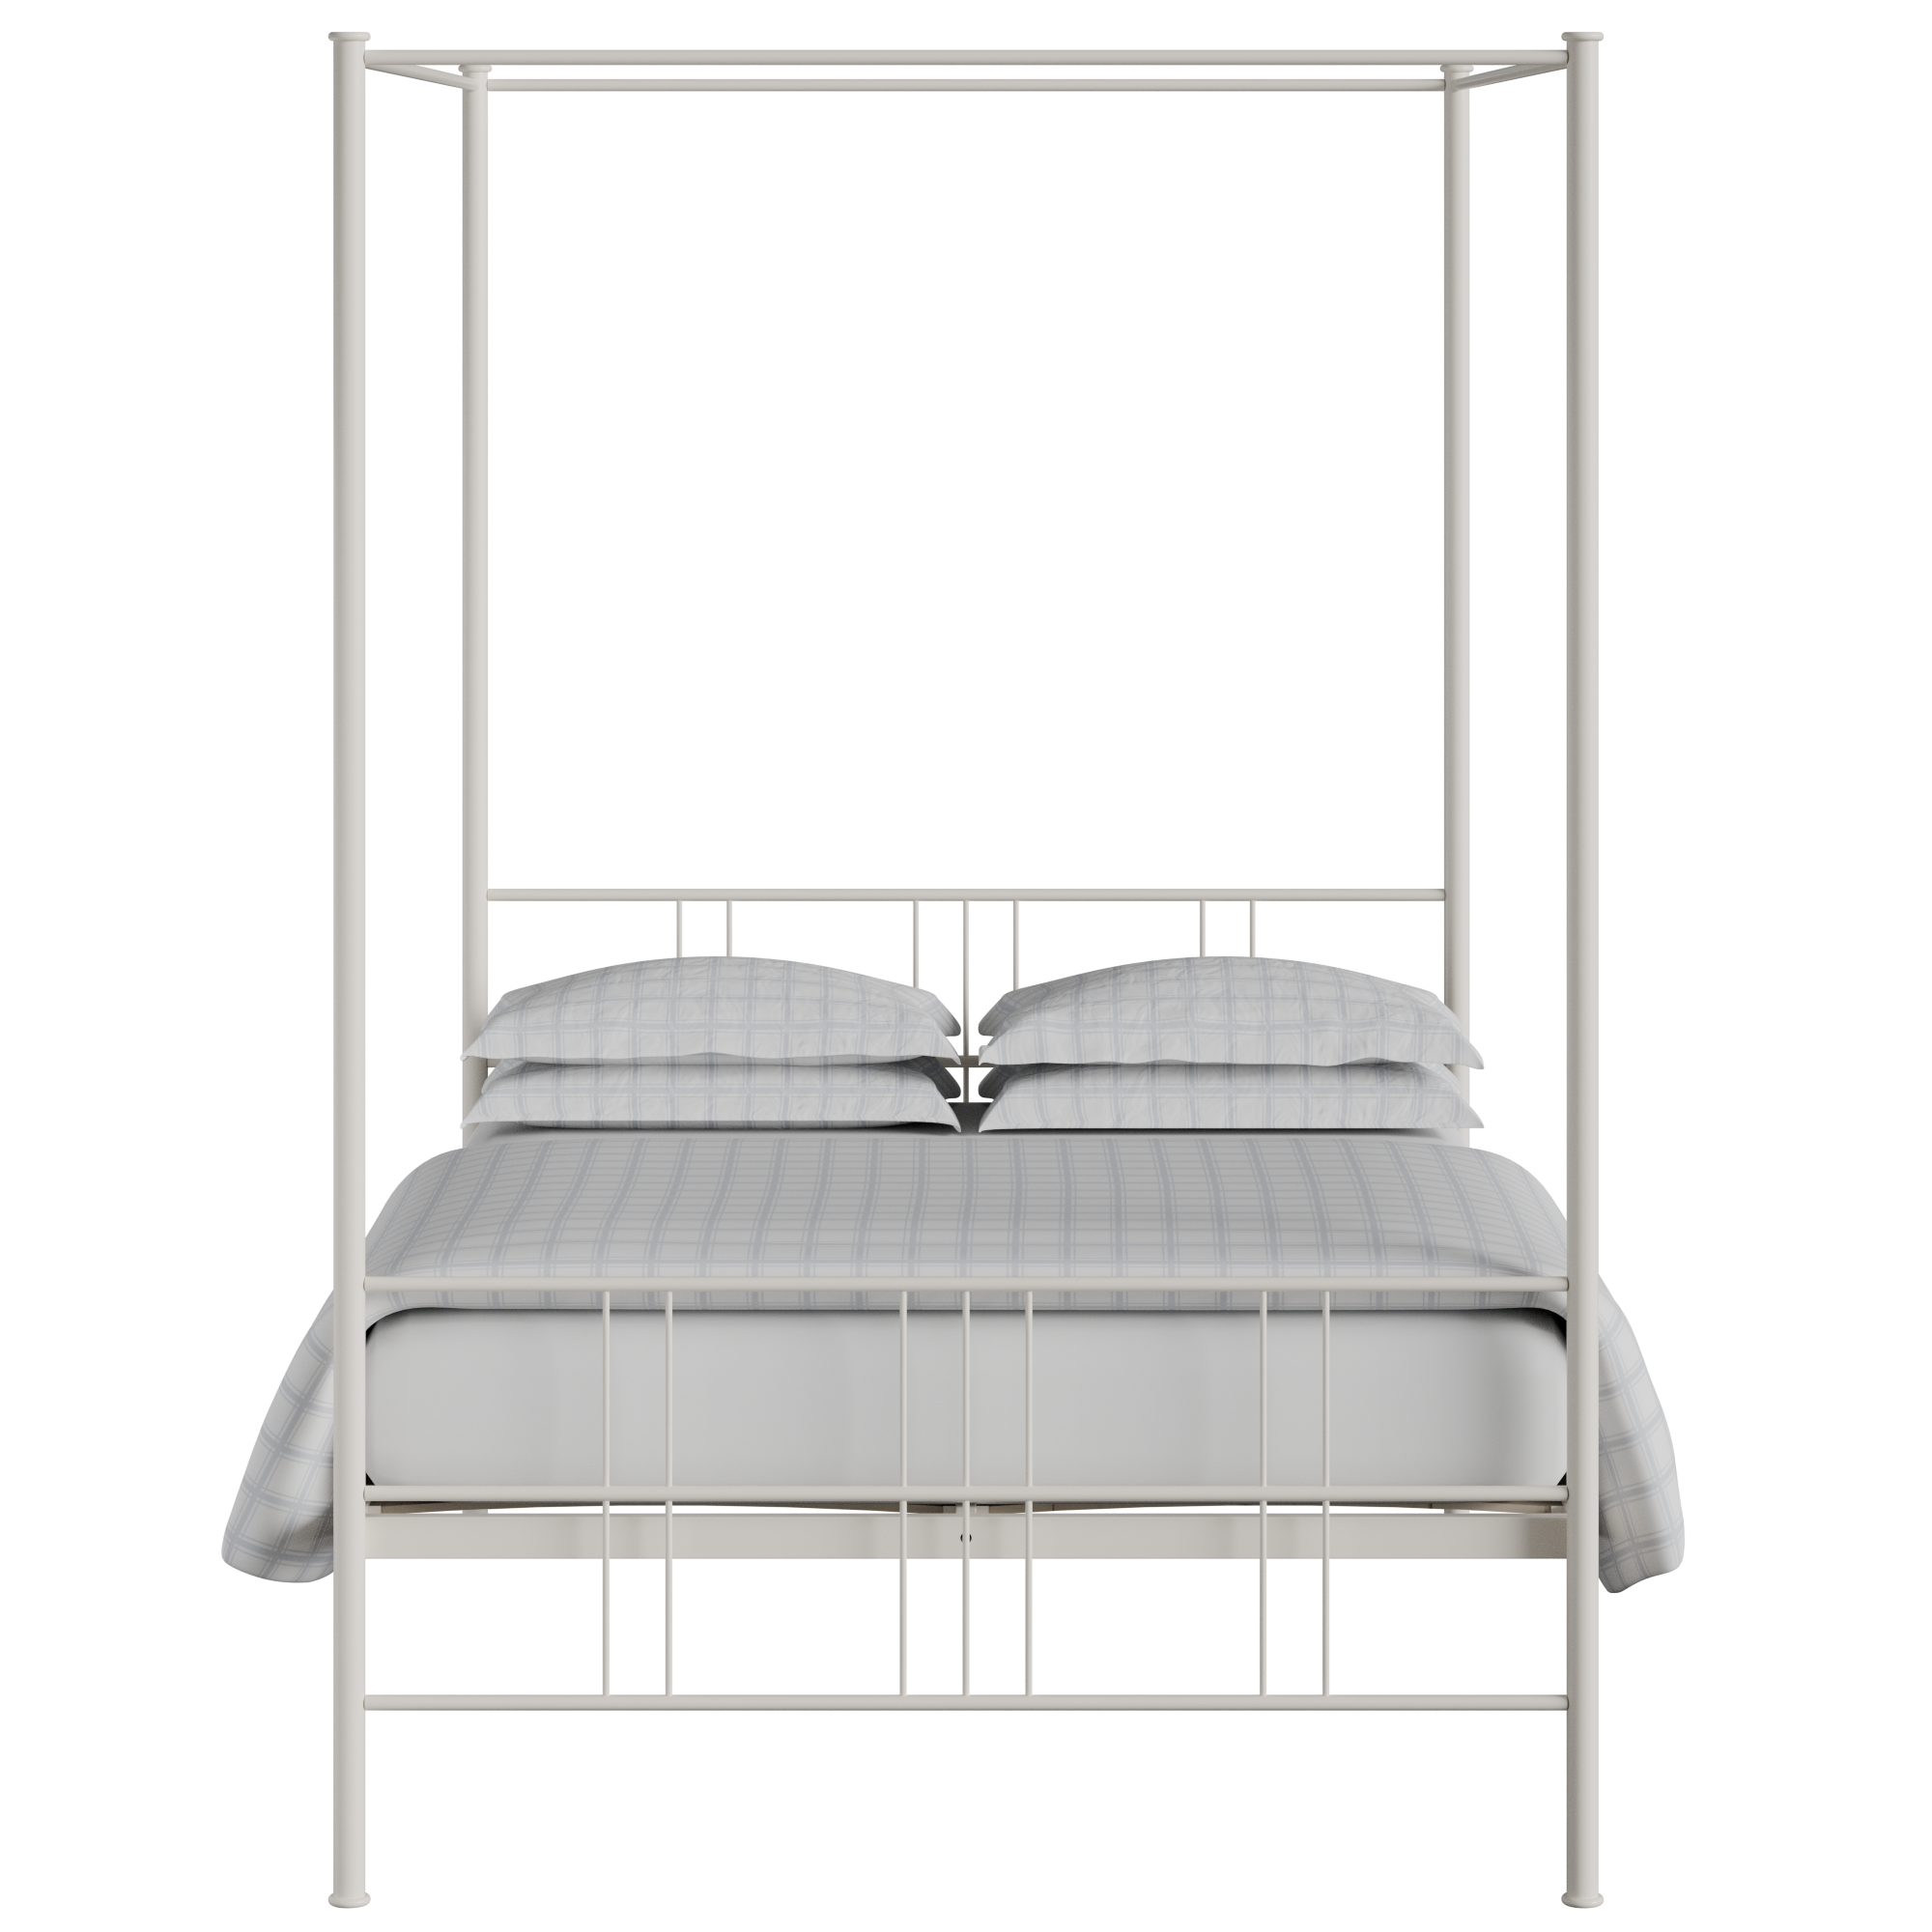 Toulon iron/metal bed in ivory